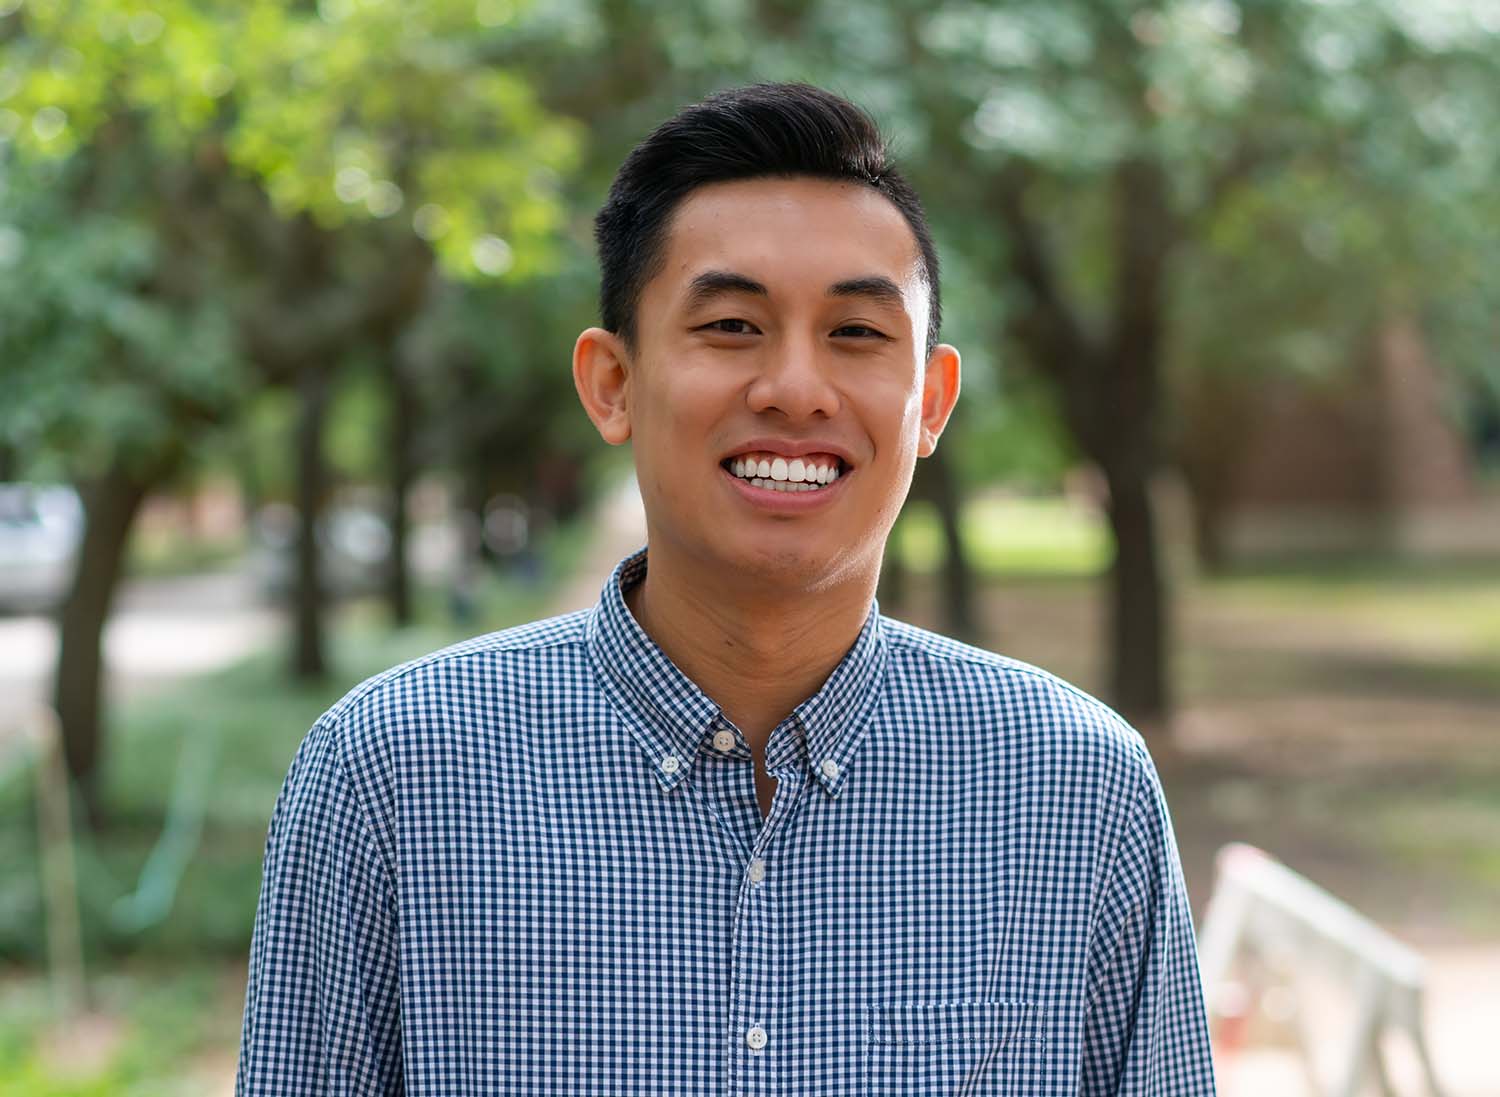 A headshot of Channing Wang, a recent Rice graduate and the author of the featured article.